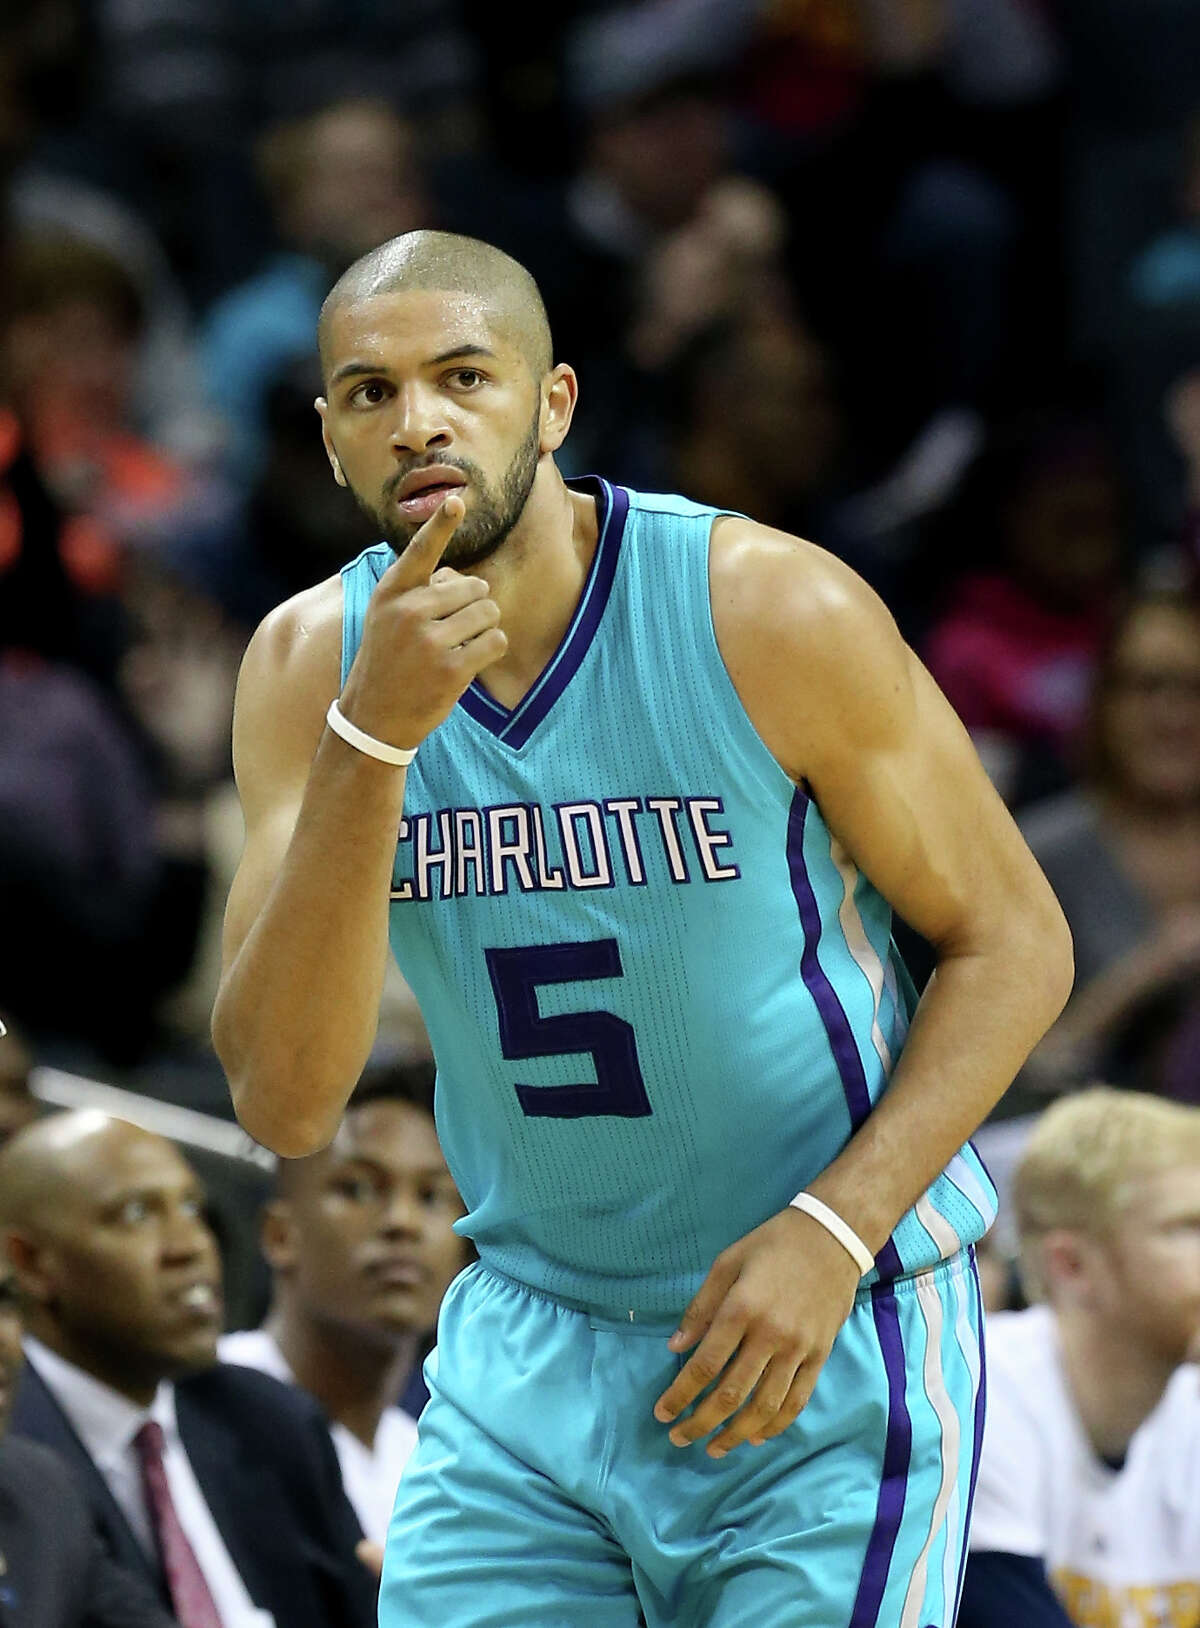 CHARLOTTE, NC - MARCH 04: Nicolas Batum #5 of the Charlotte Hornets reacts after a play during their game against the Indiana Pacers at Time Warner Cable Arena on March 4, 2016 in Charlotte, North Carolina. NOTE TO USER: User expressly acknowledges and agrees that, by downloading and or using this photograph, User is consenting to the terms and conditions of the Getty Images License Agreement.